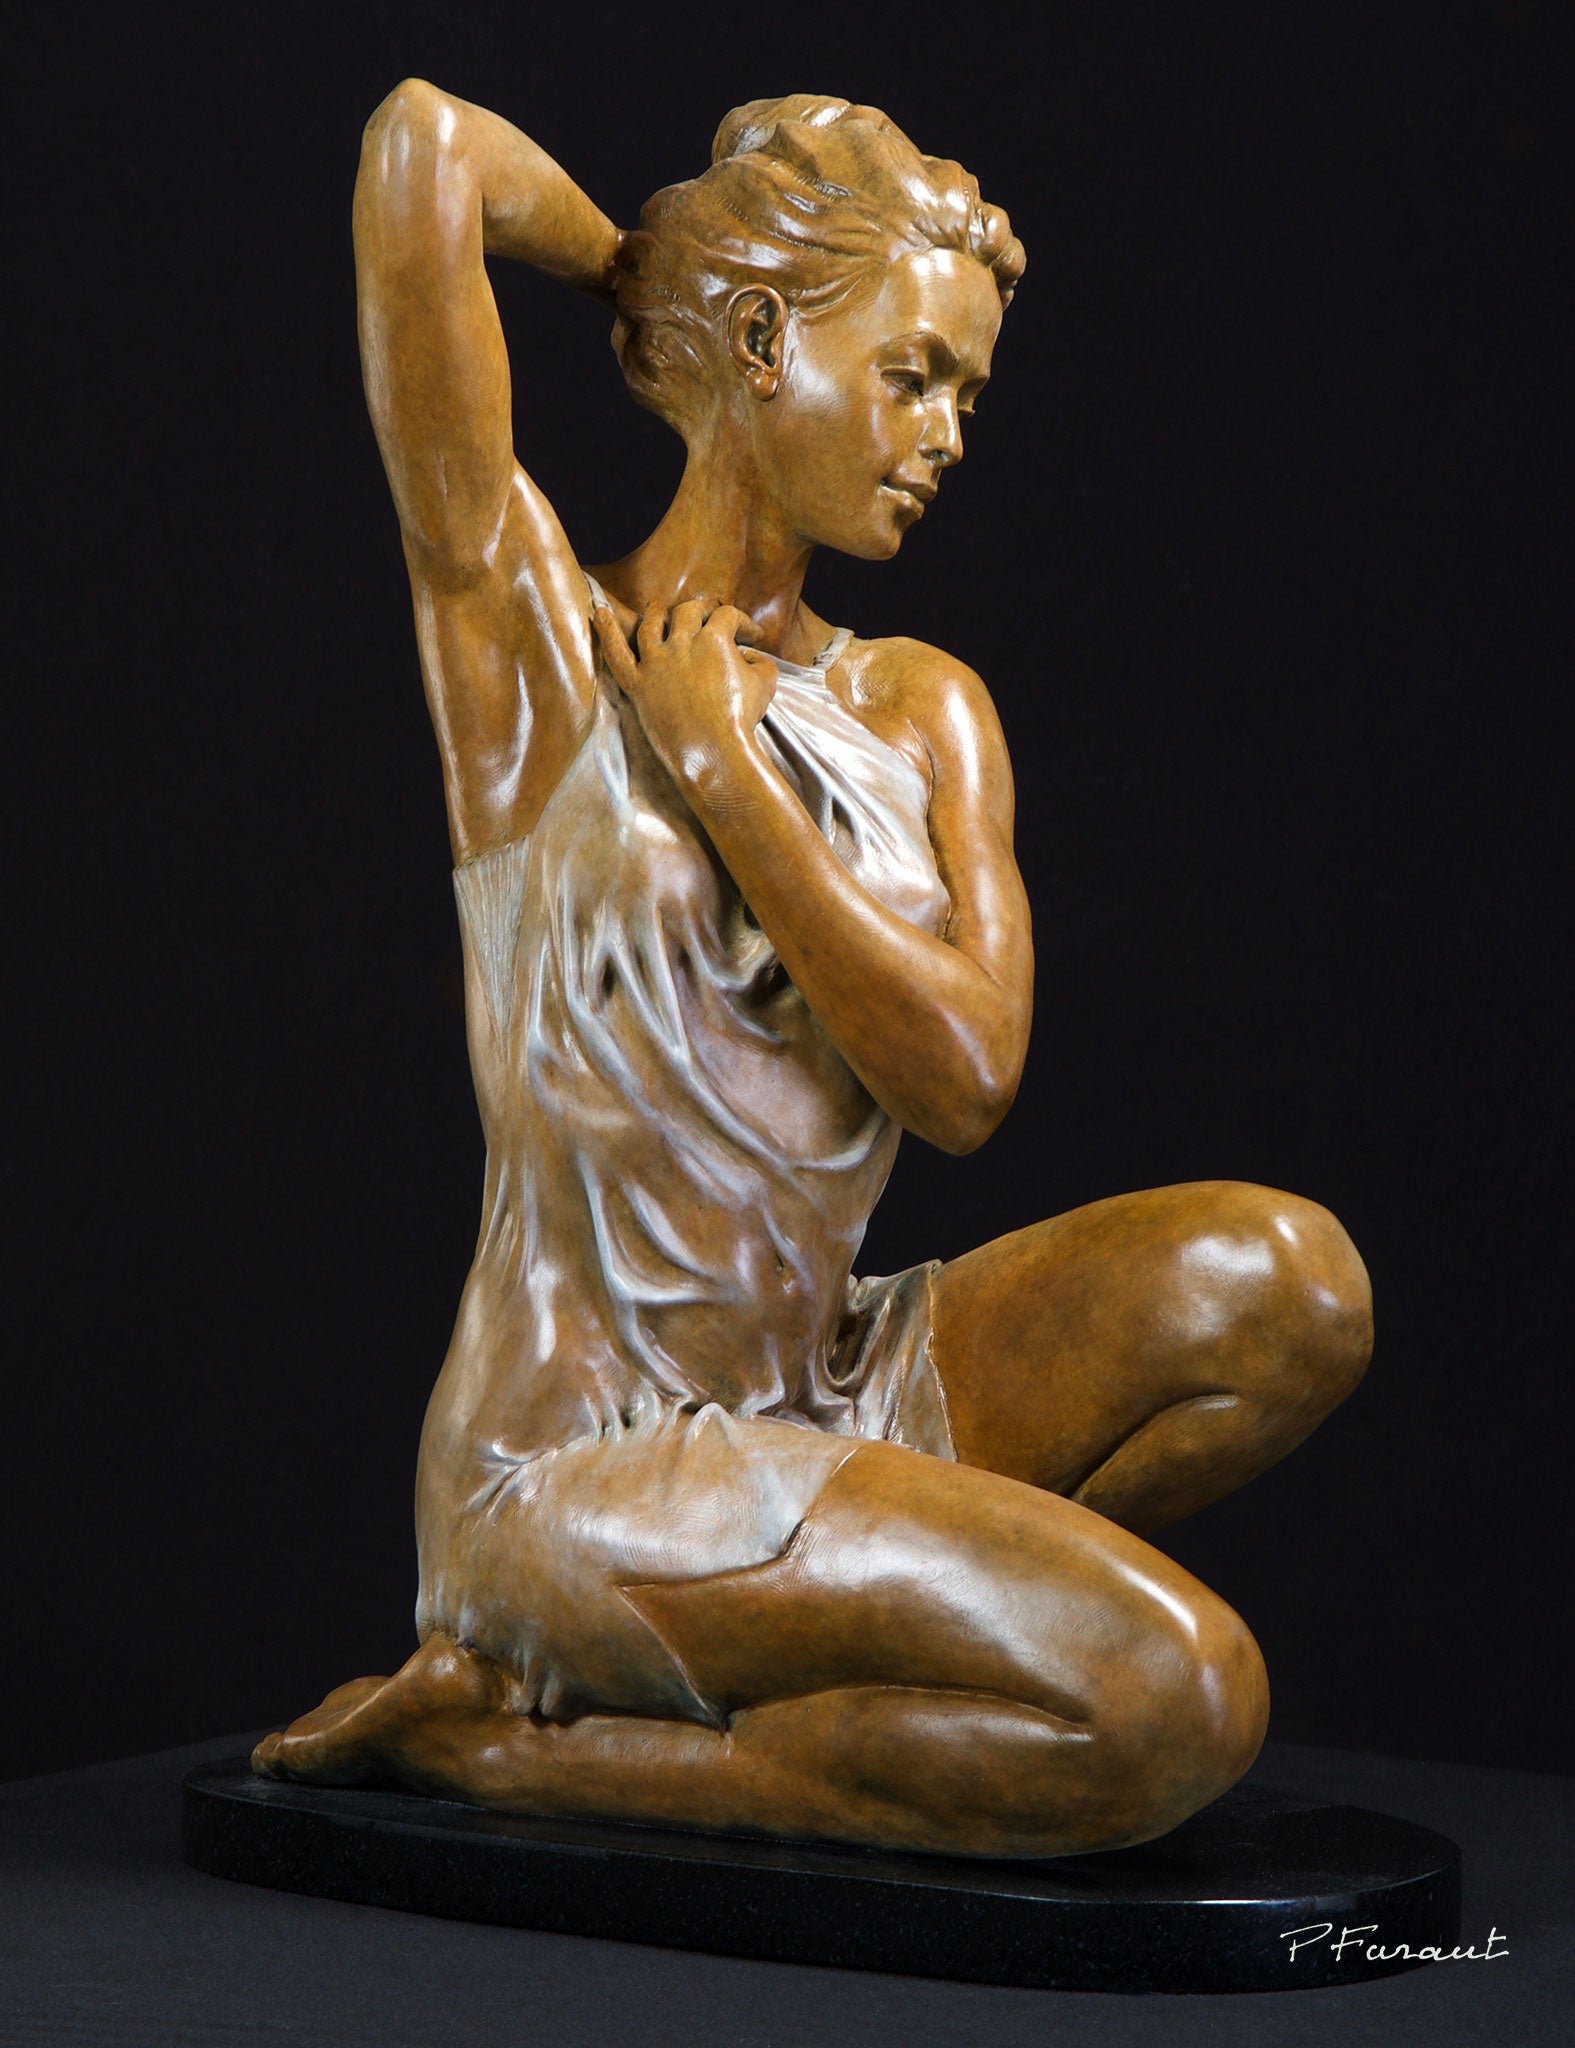 Beautiful bronze figure sculpture of young woman in sheer fabric limited edition bronze by Faraut